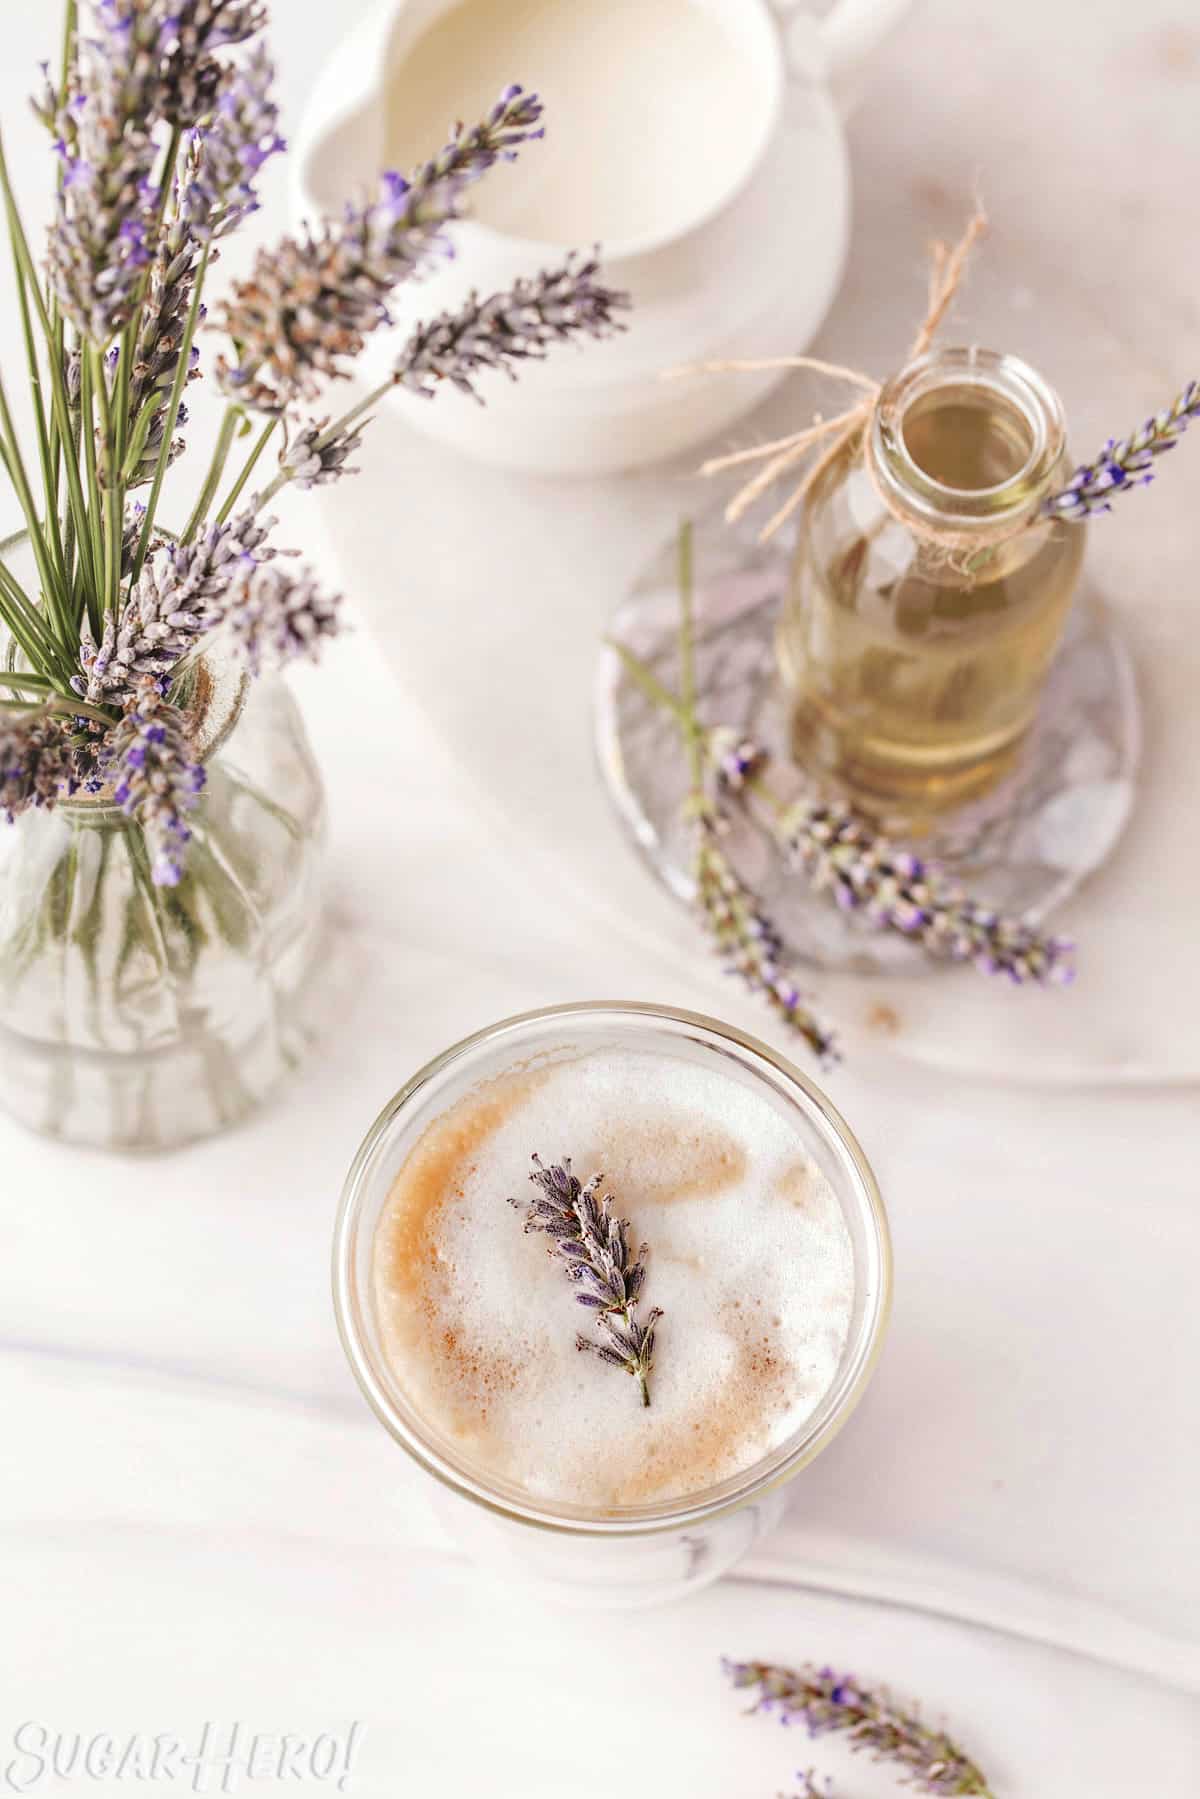 Overhead shot of a lavender latte, fresh lavender, and simple syrup in a glass jar.